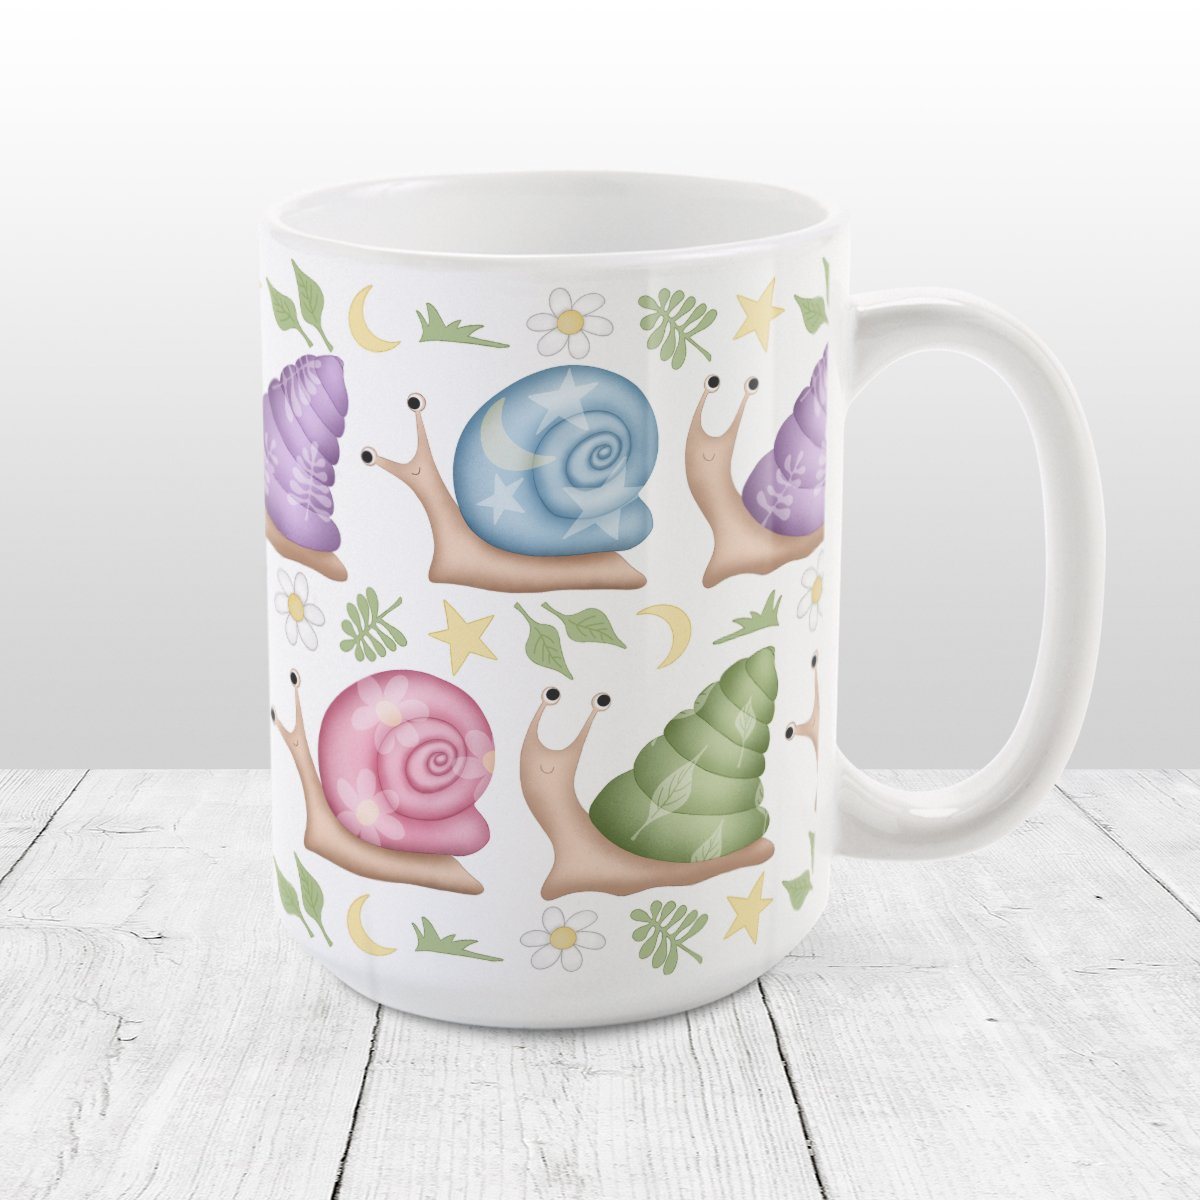 Cute Spring Summer Snails Pattern Mug at Amy's Coffee Mugs. A cute snails mug with a whimsical pattern of snails with happy faces in two rows around the mug with pink, purple, blue, and green shells floral and stars watermarks, with foliage, moons, and stars between the rows.